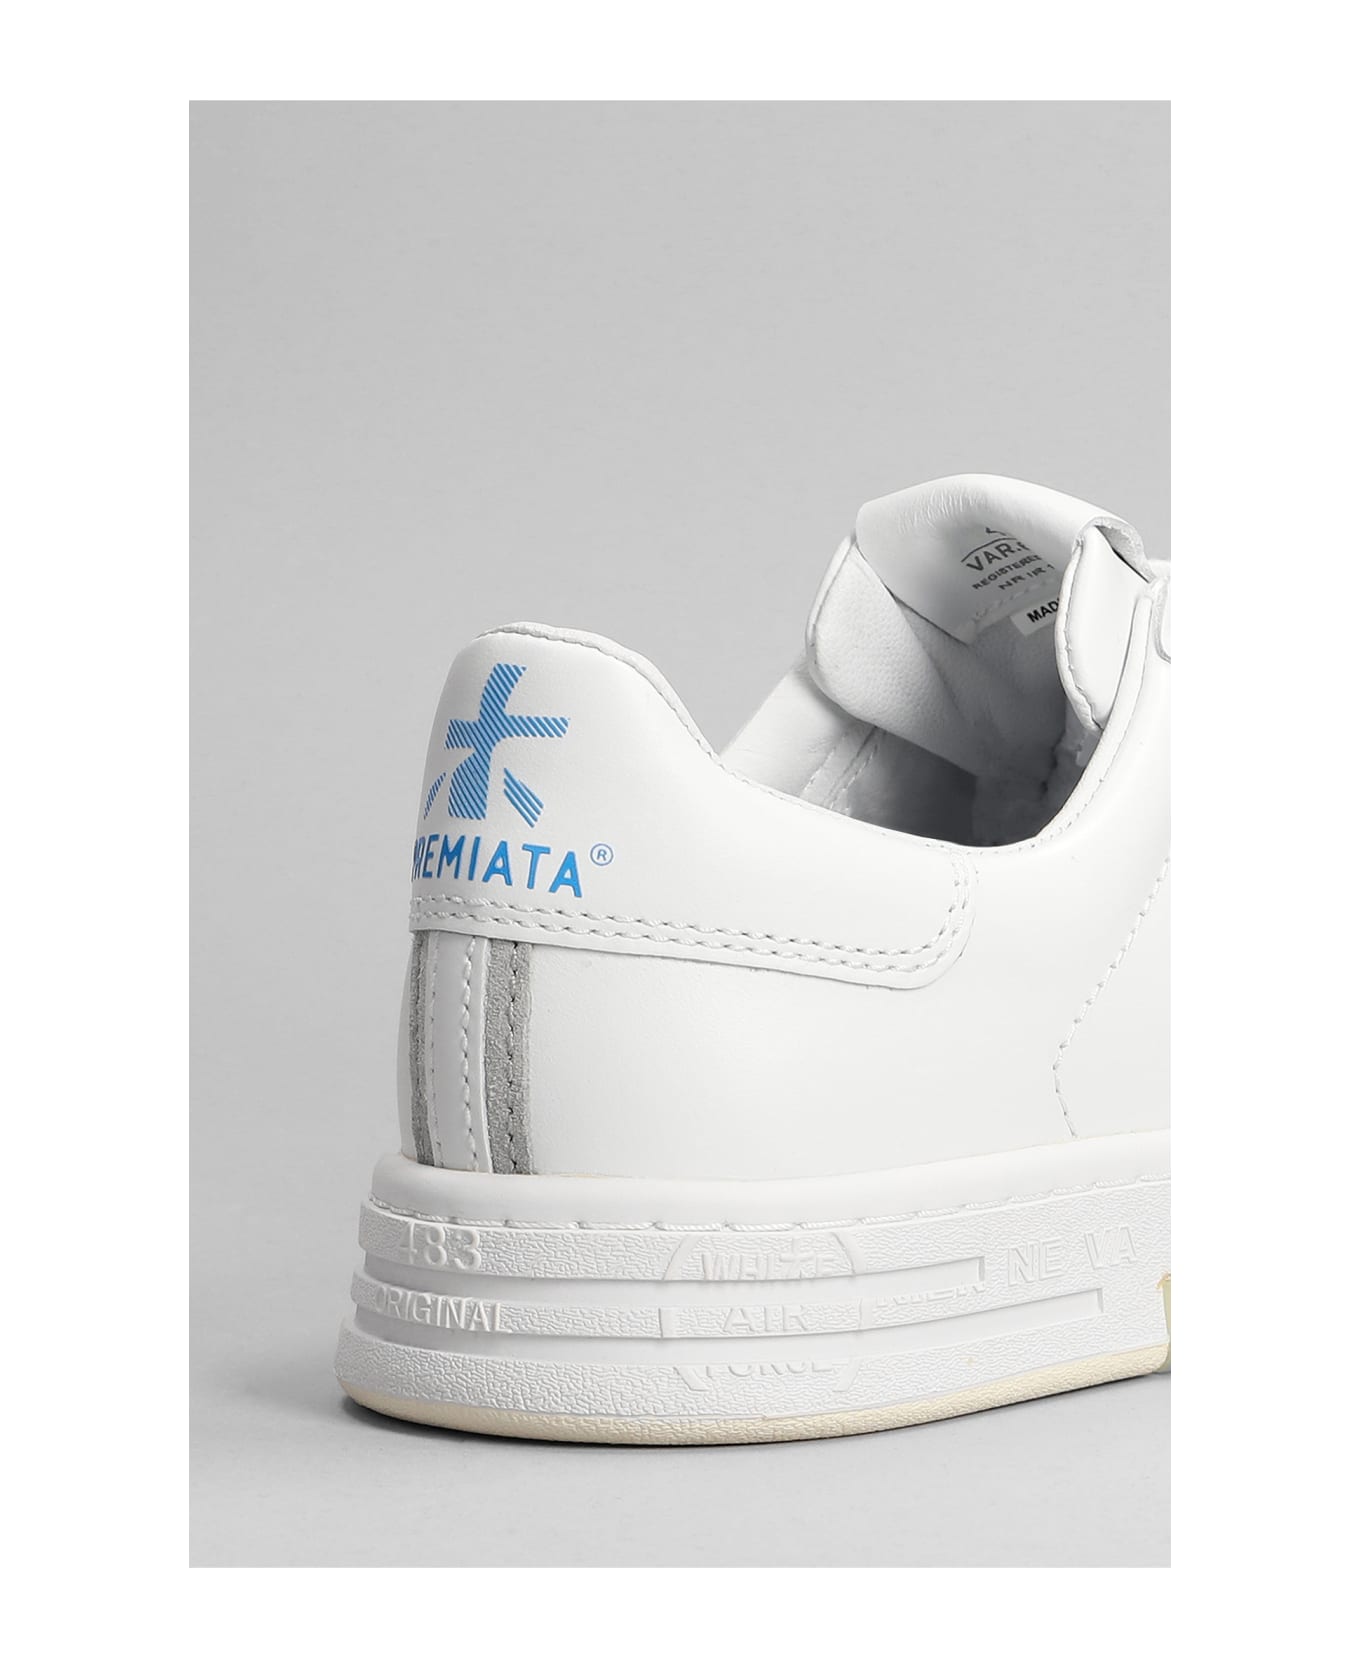 Premiata Russell Sneakers In White Leather - Bianco